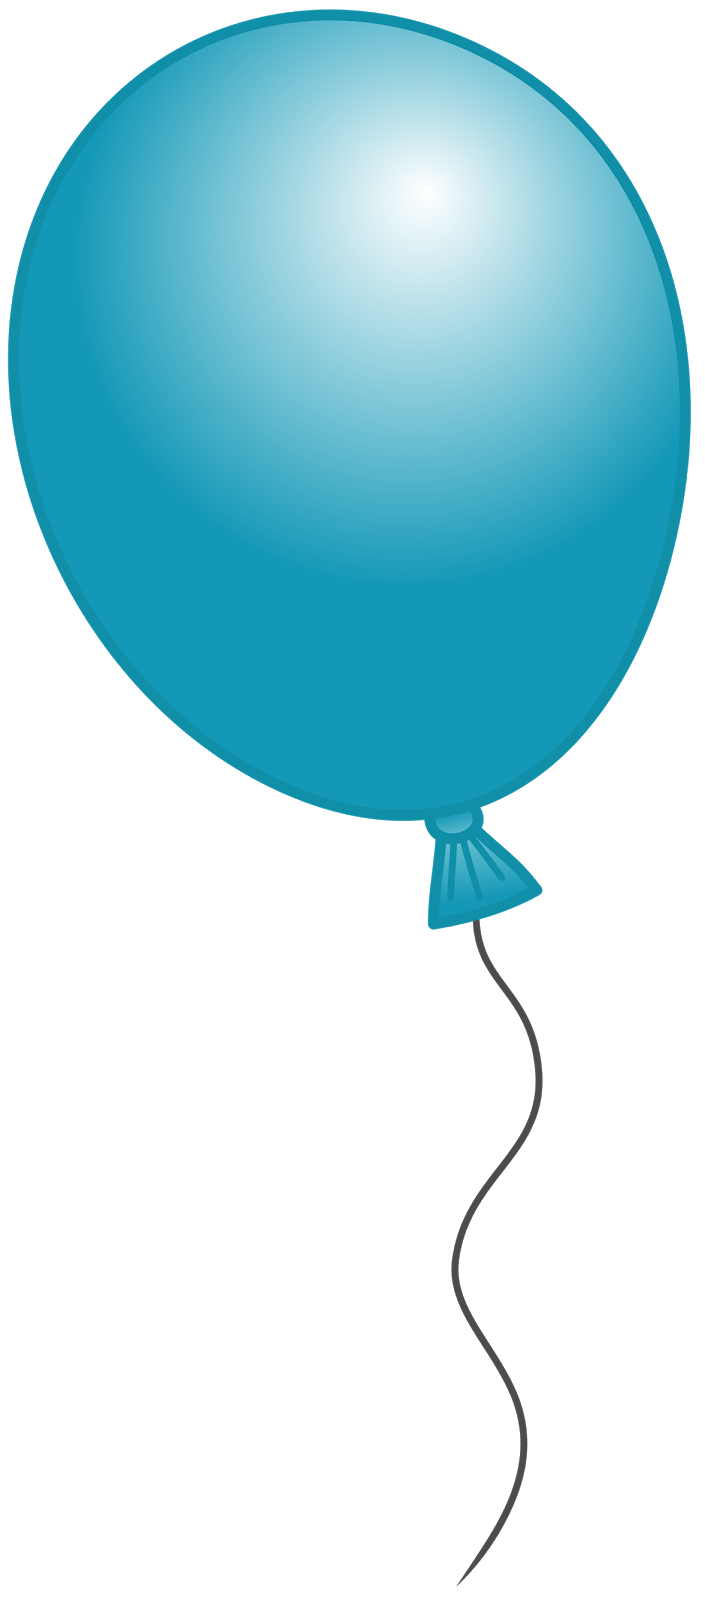 free-birthday-balloon-clip-art-free-clipart-images-8-clipartix